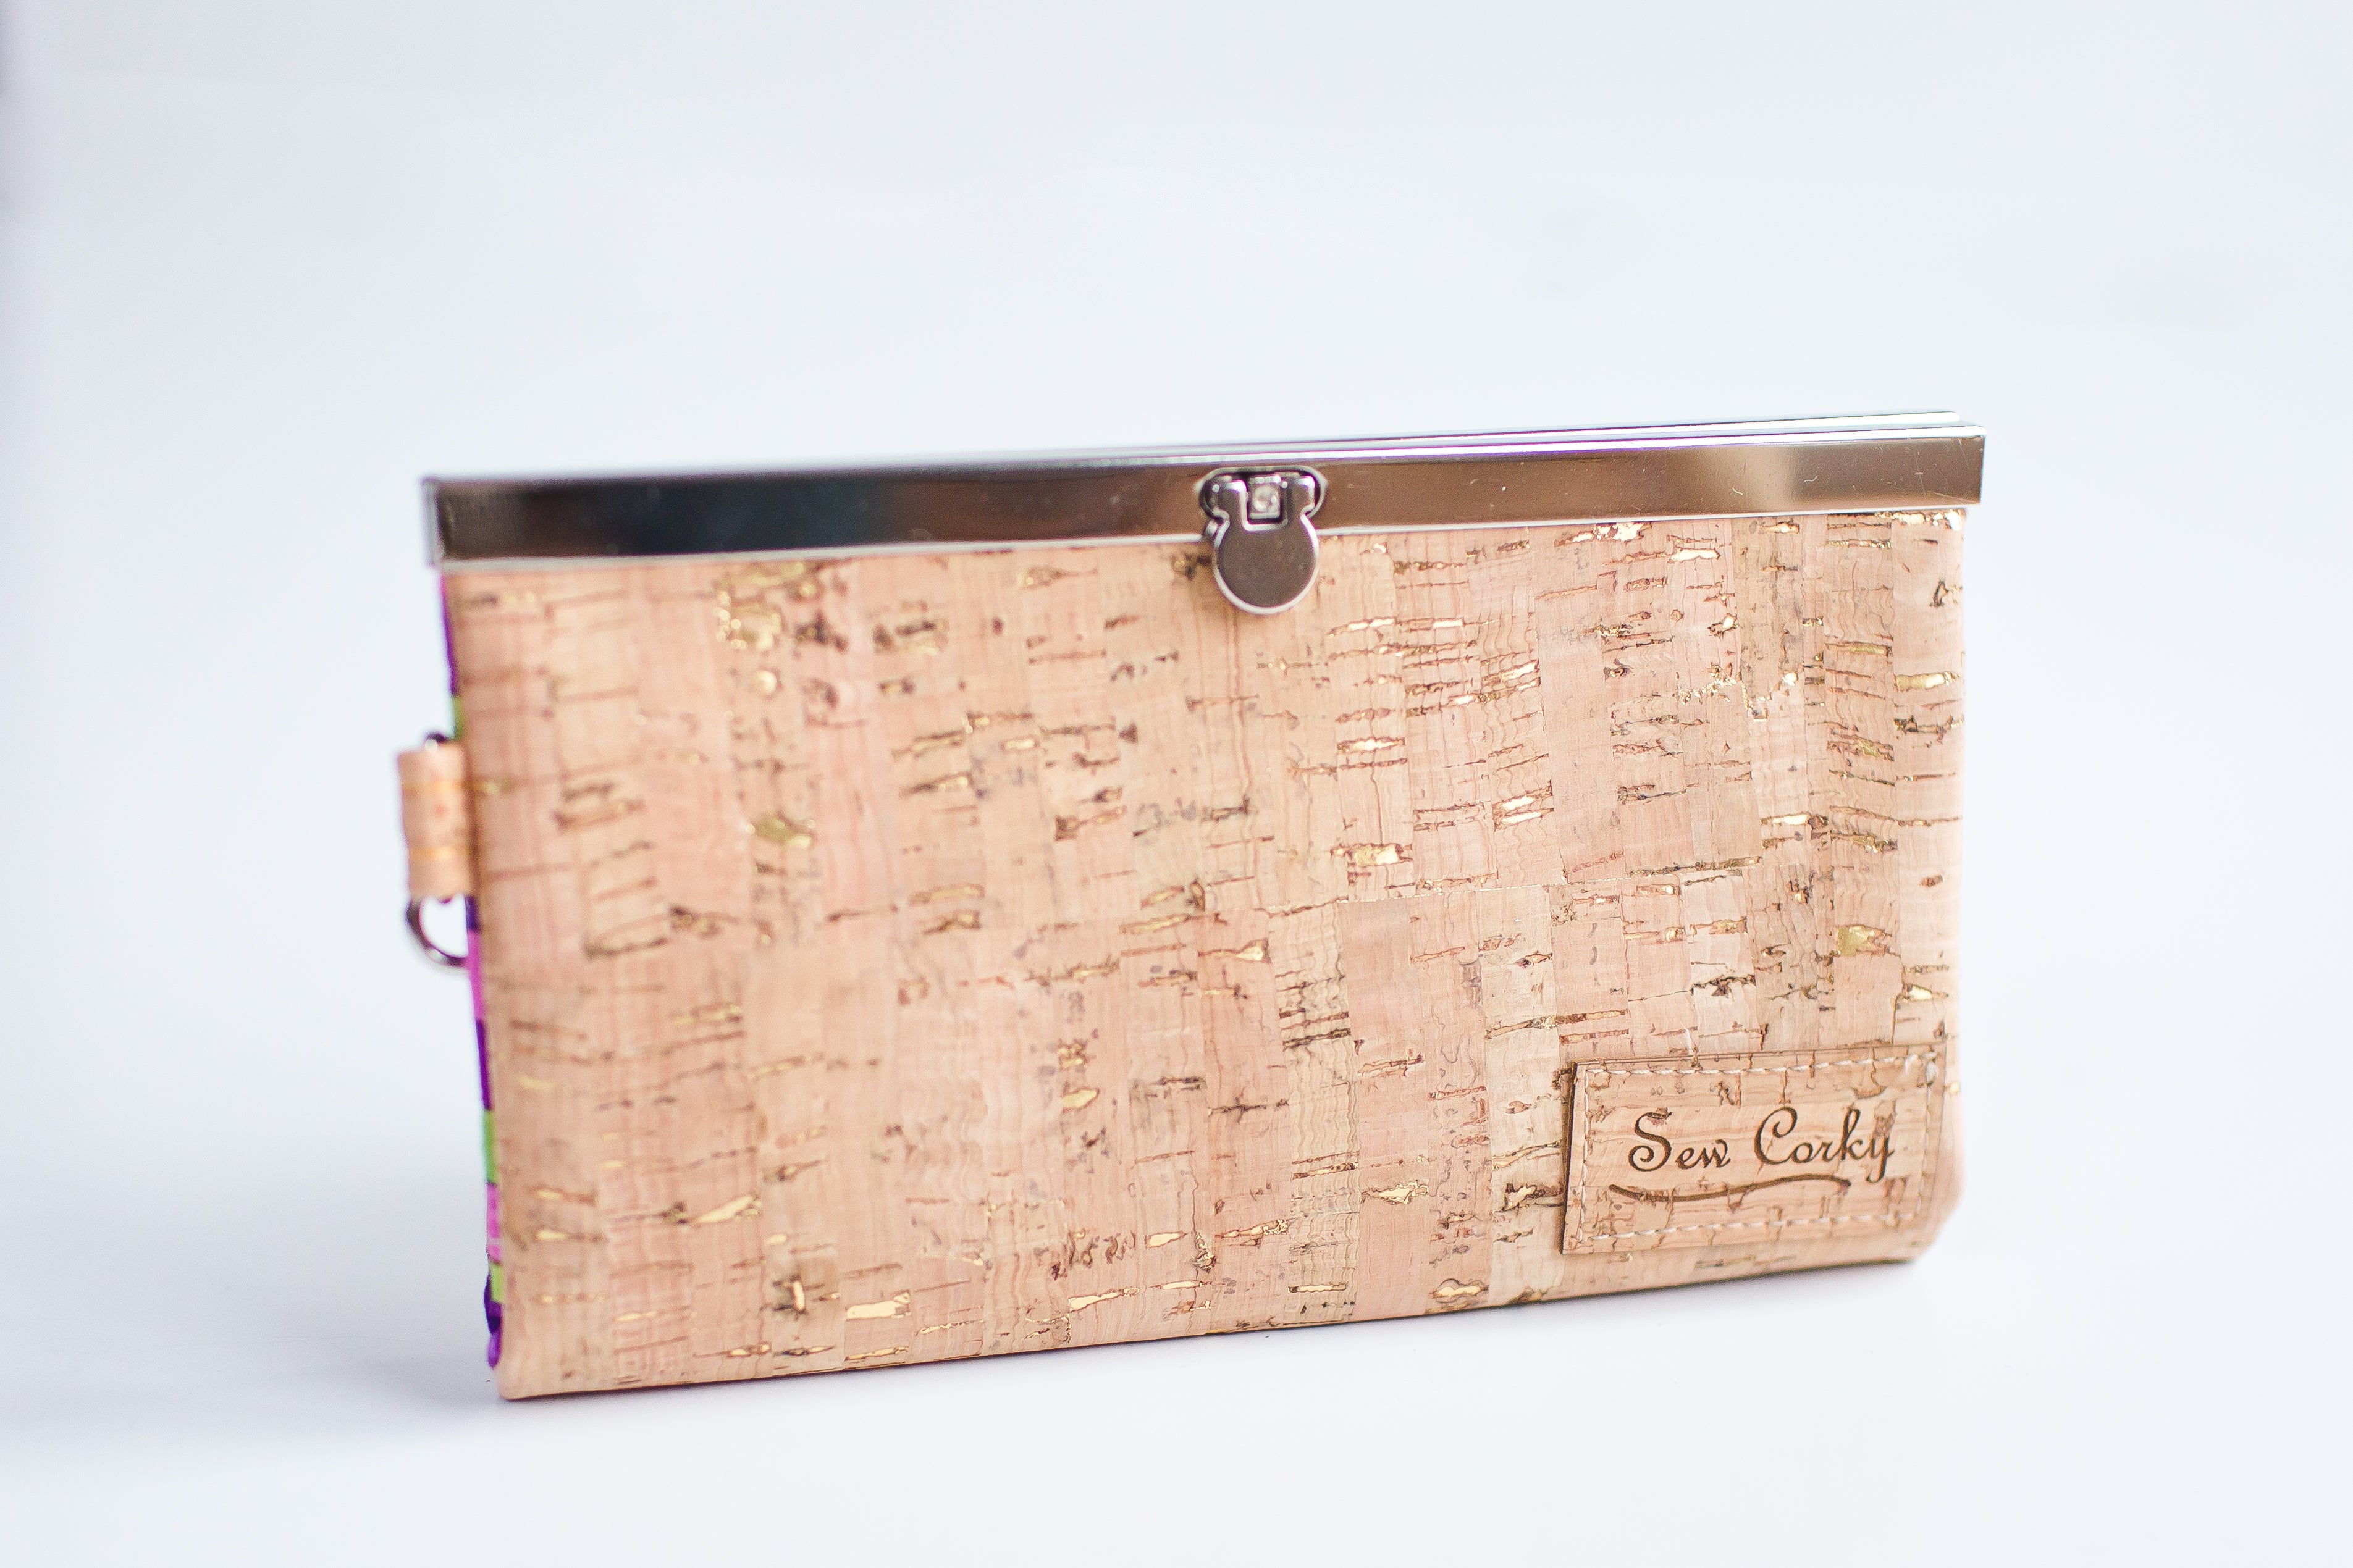 B5-Gracie Womens Wallet in Natural Cork and Silver